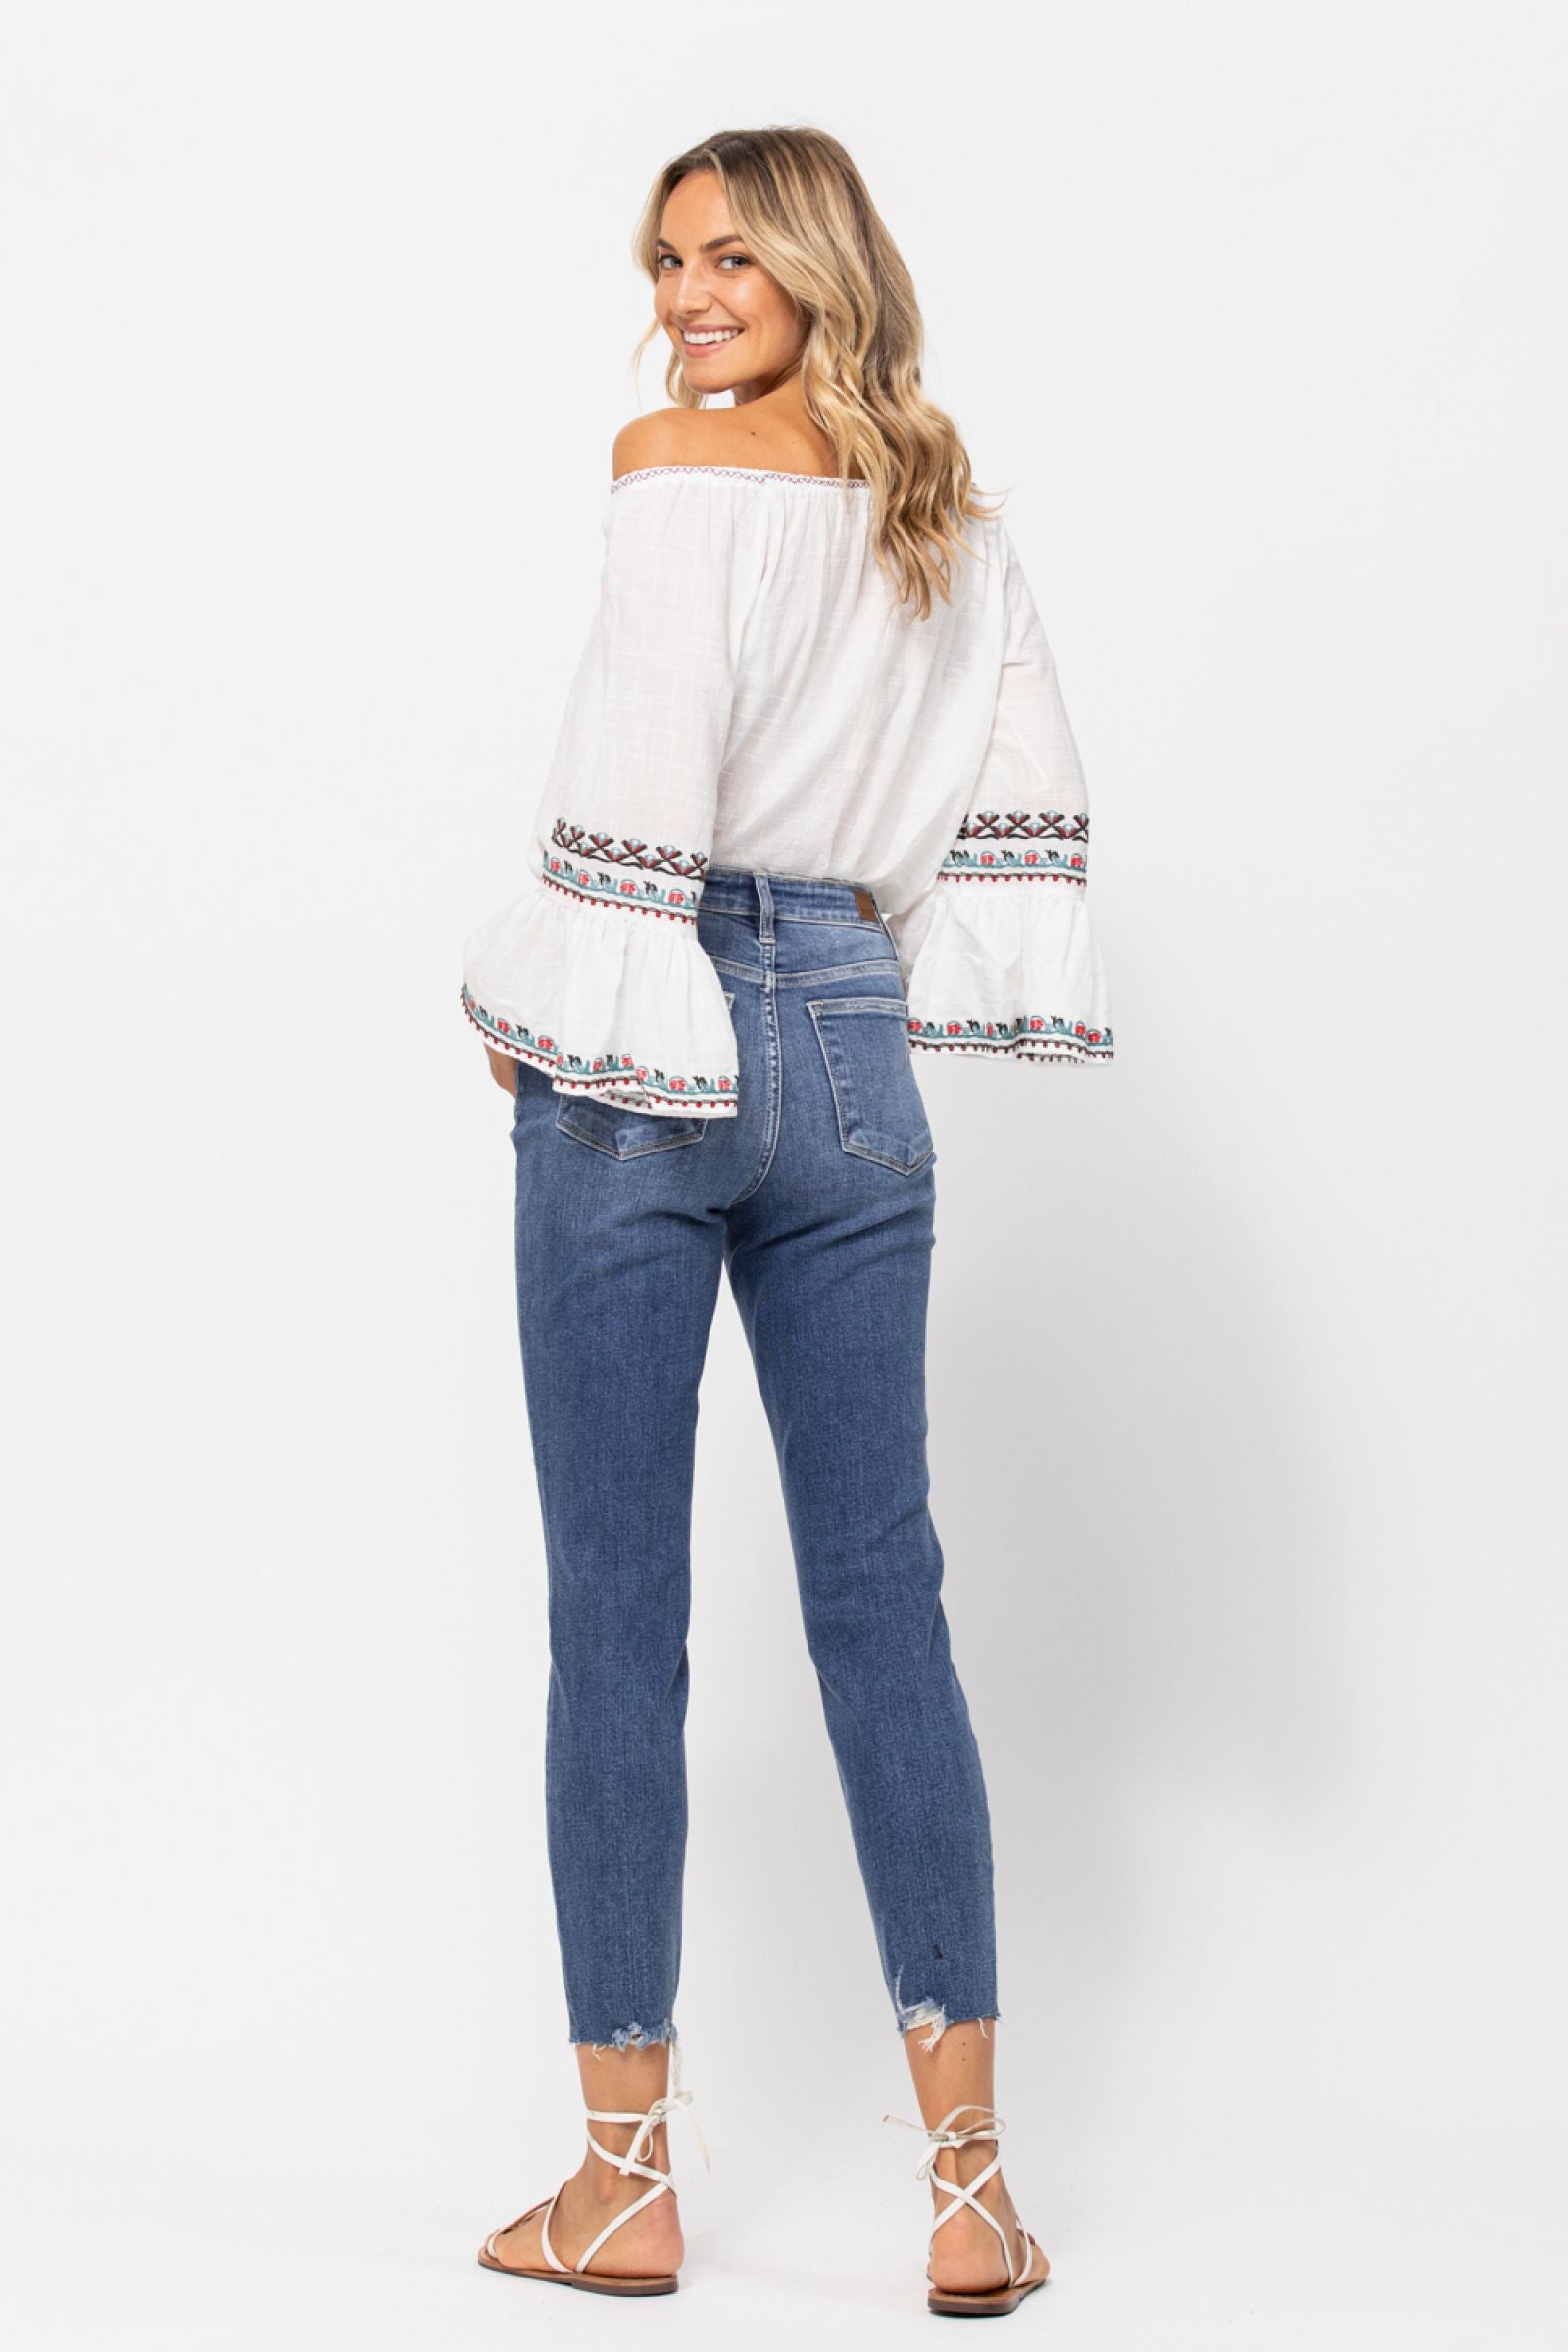 Judy Blue~ HI-WAIST DESTROYED RELAXED FIT